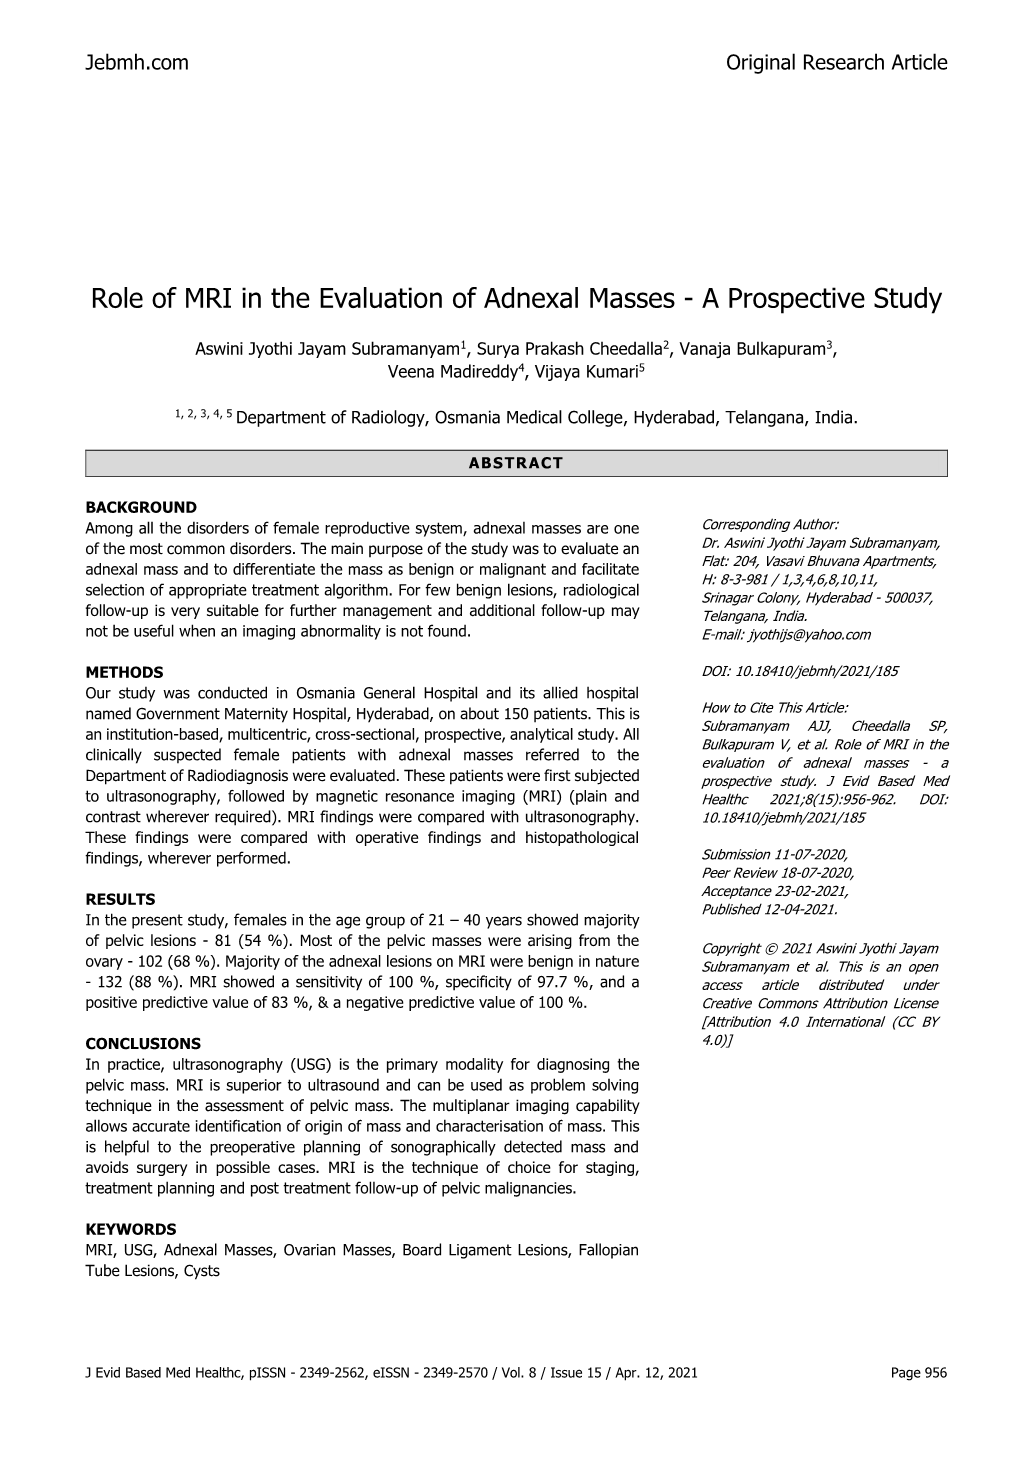 Role of MRI in the Evaluation of Adnexal Masses - a Prospective Study